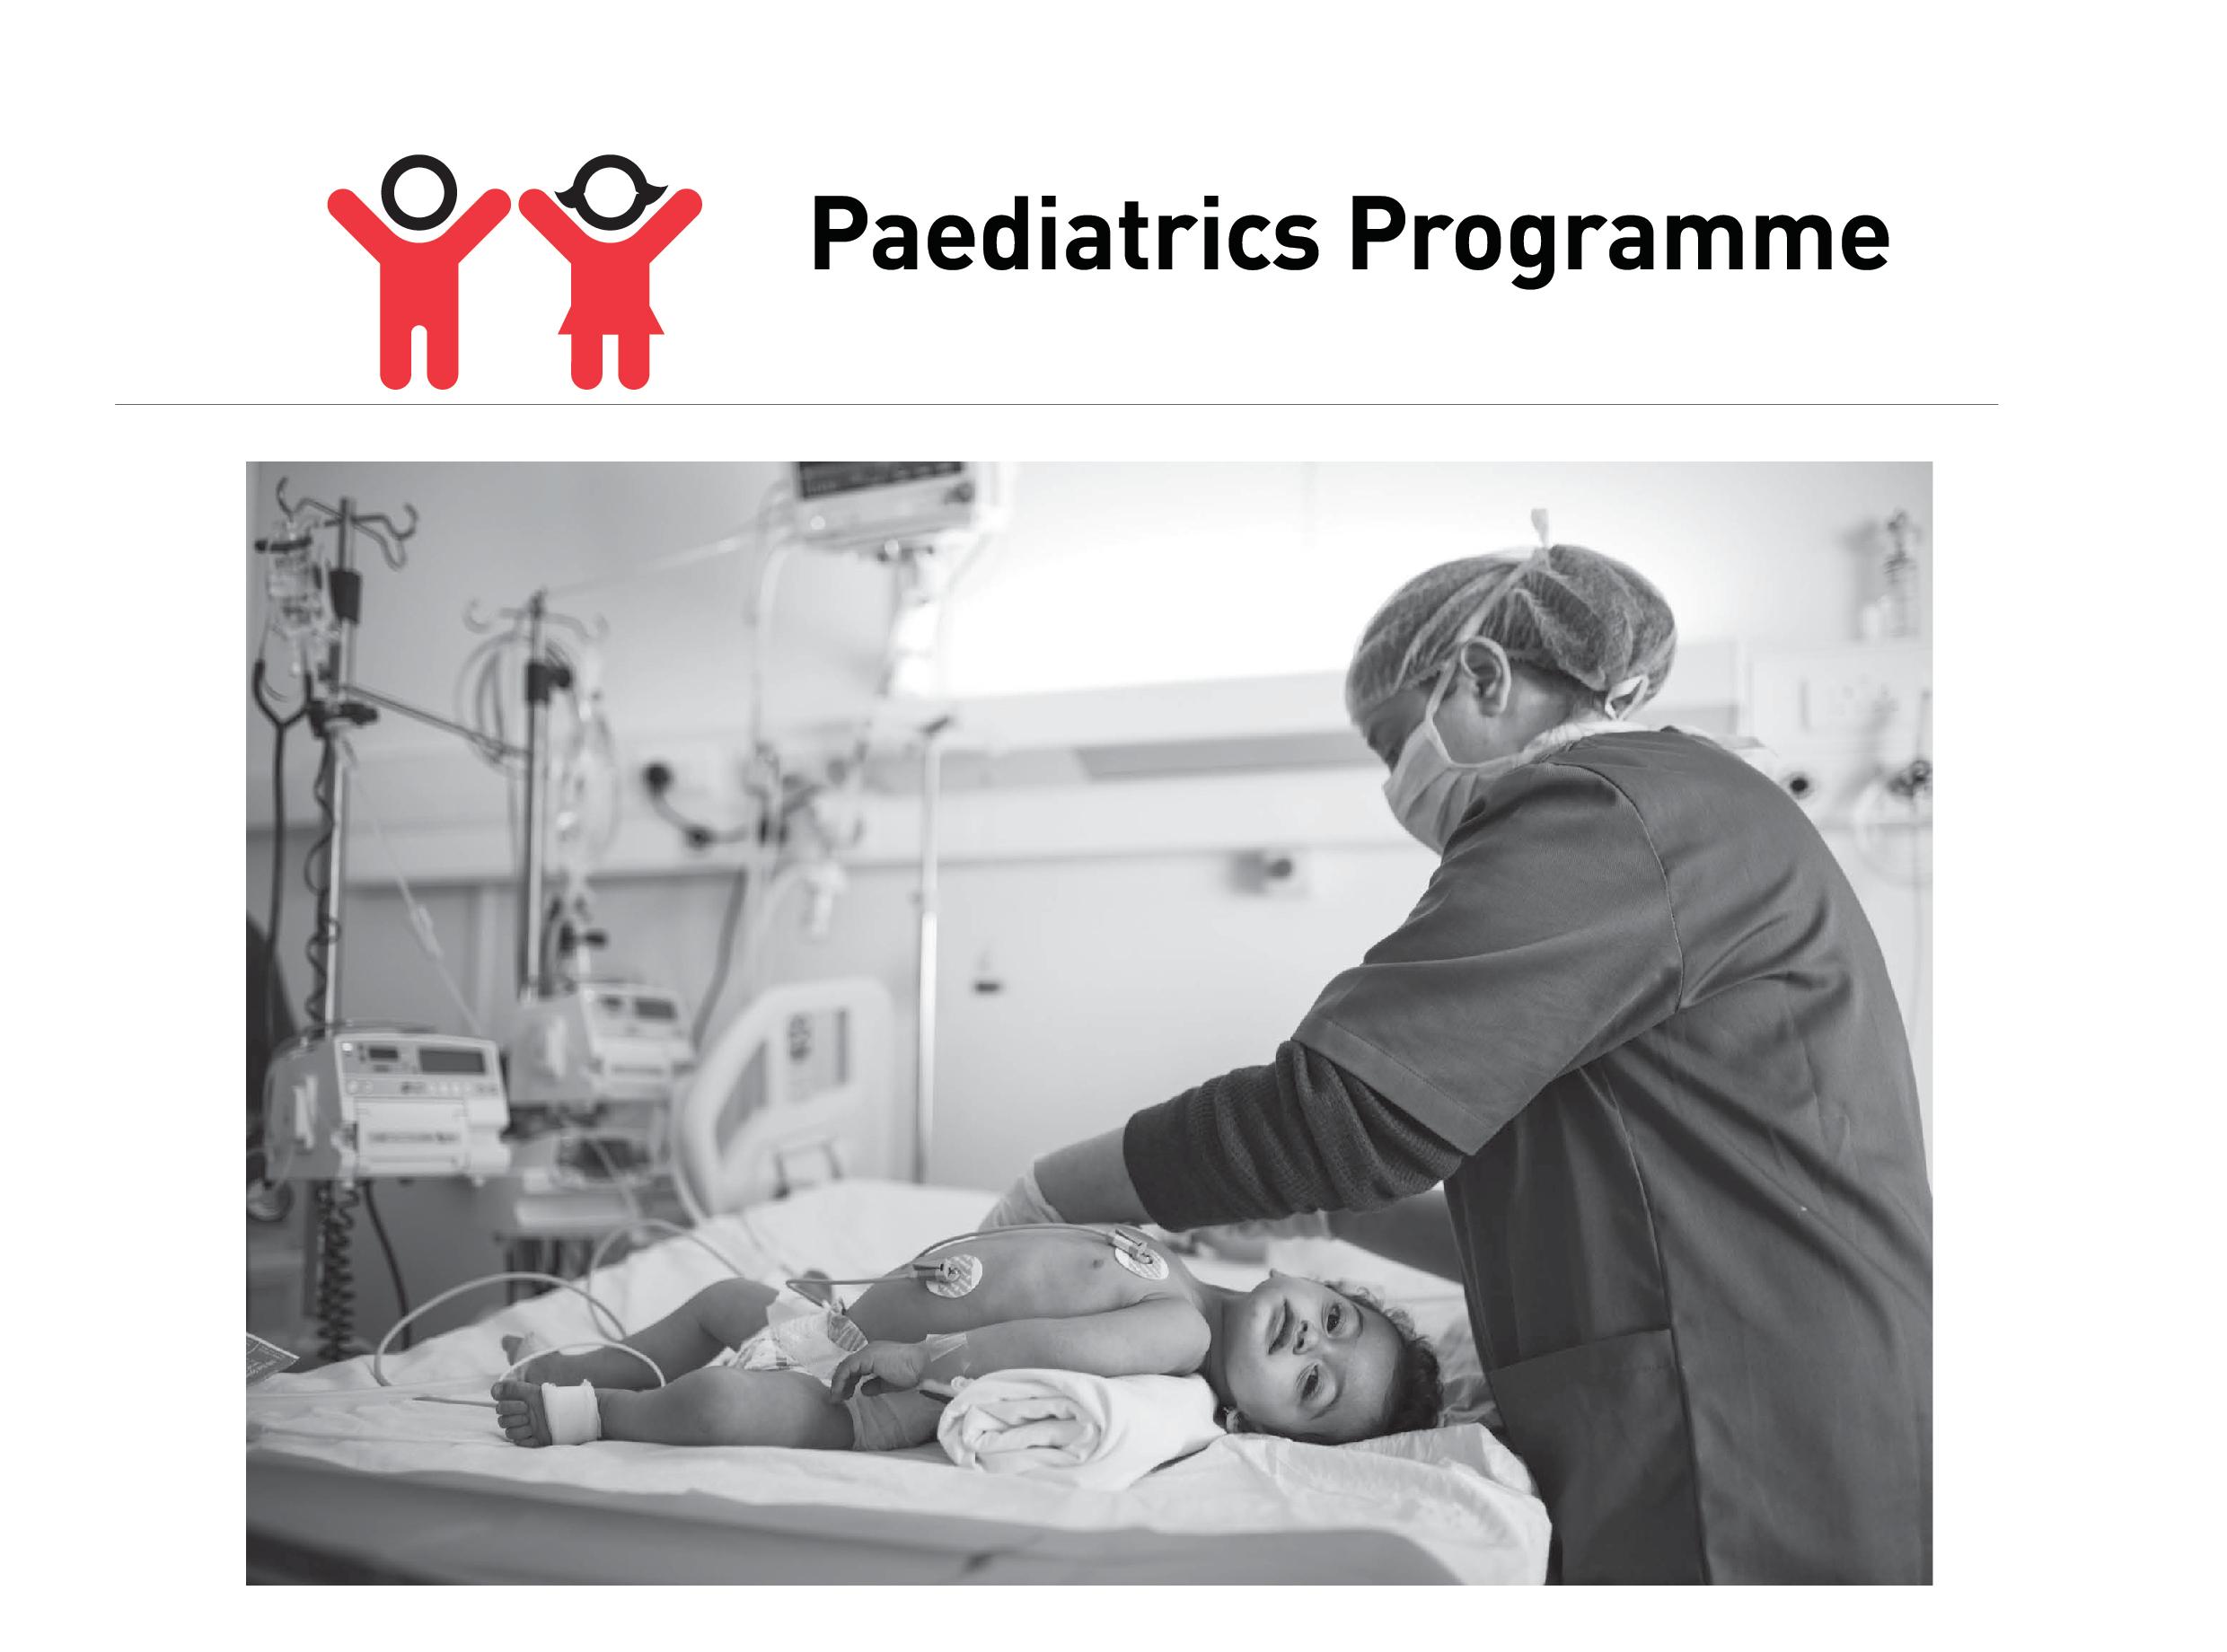 MSF in Lebanon: THEN and NOW, Paediatrics Programme